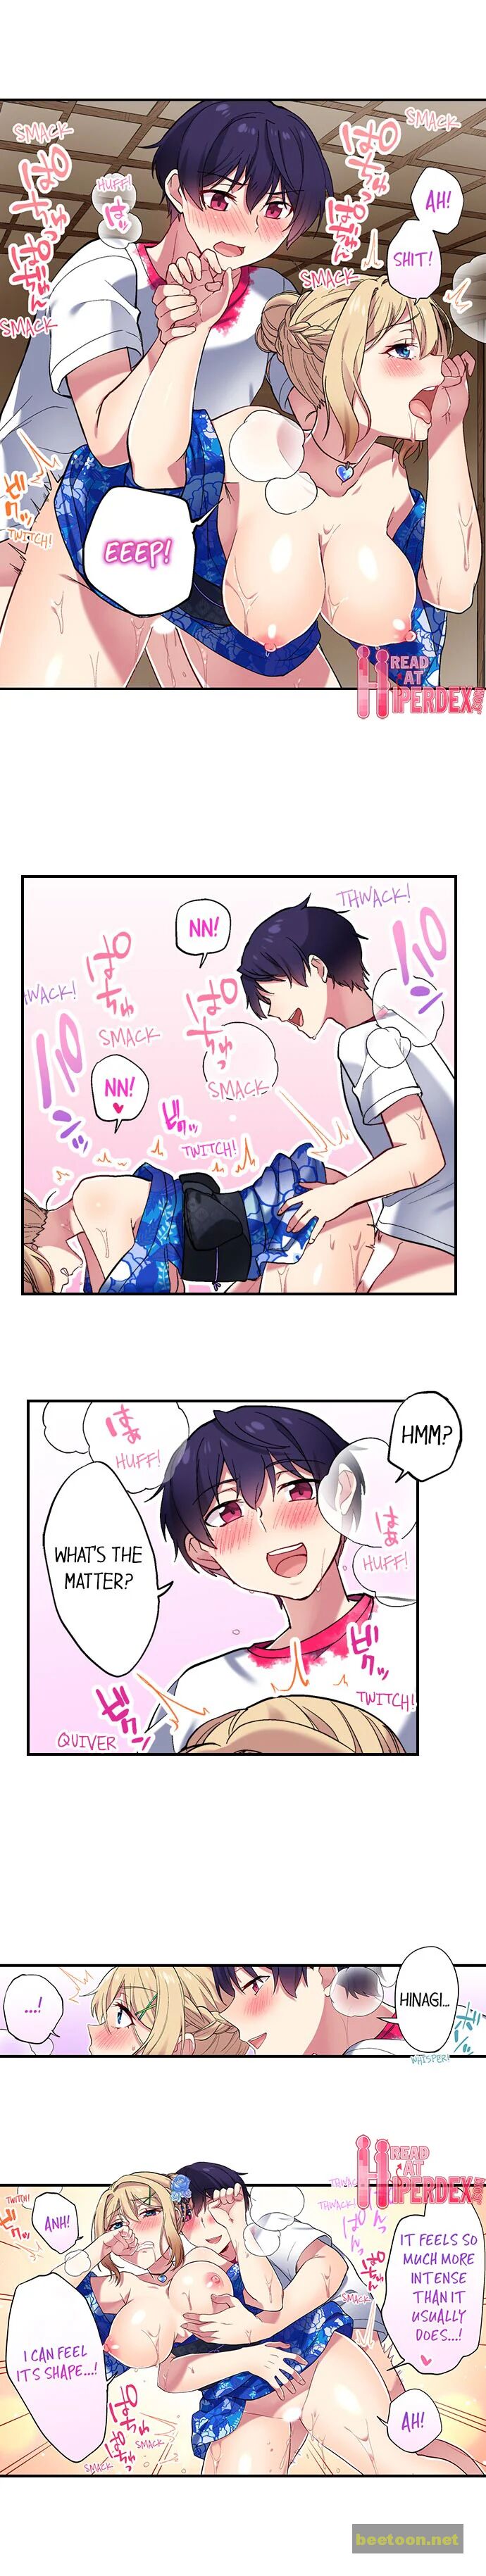 I Can See The Number Of Times People Orgasm Chapter 90 - MyToon.net